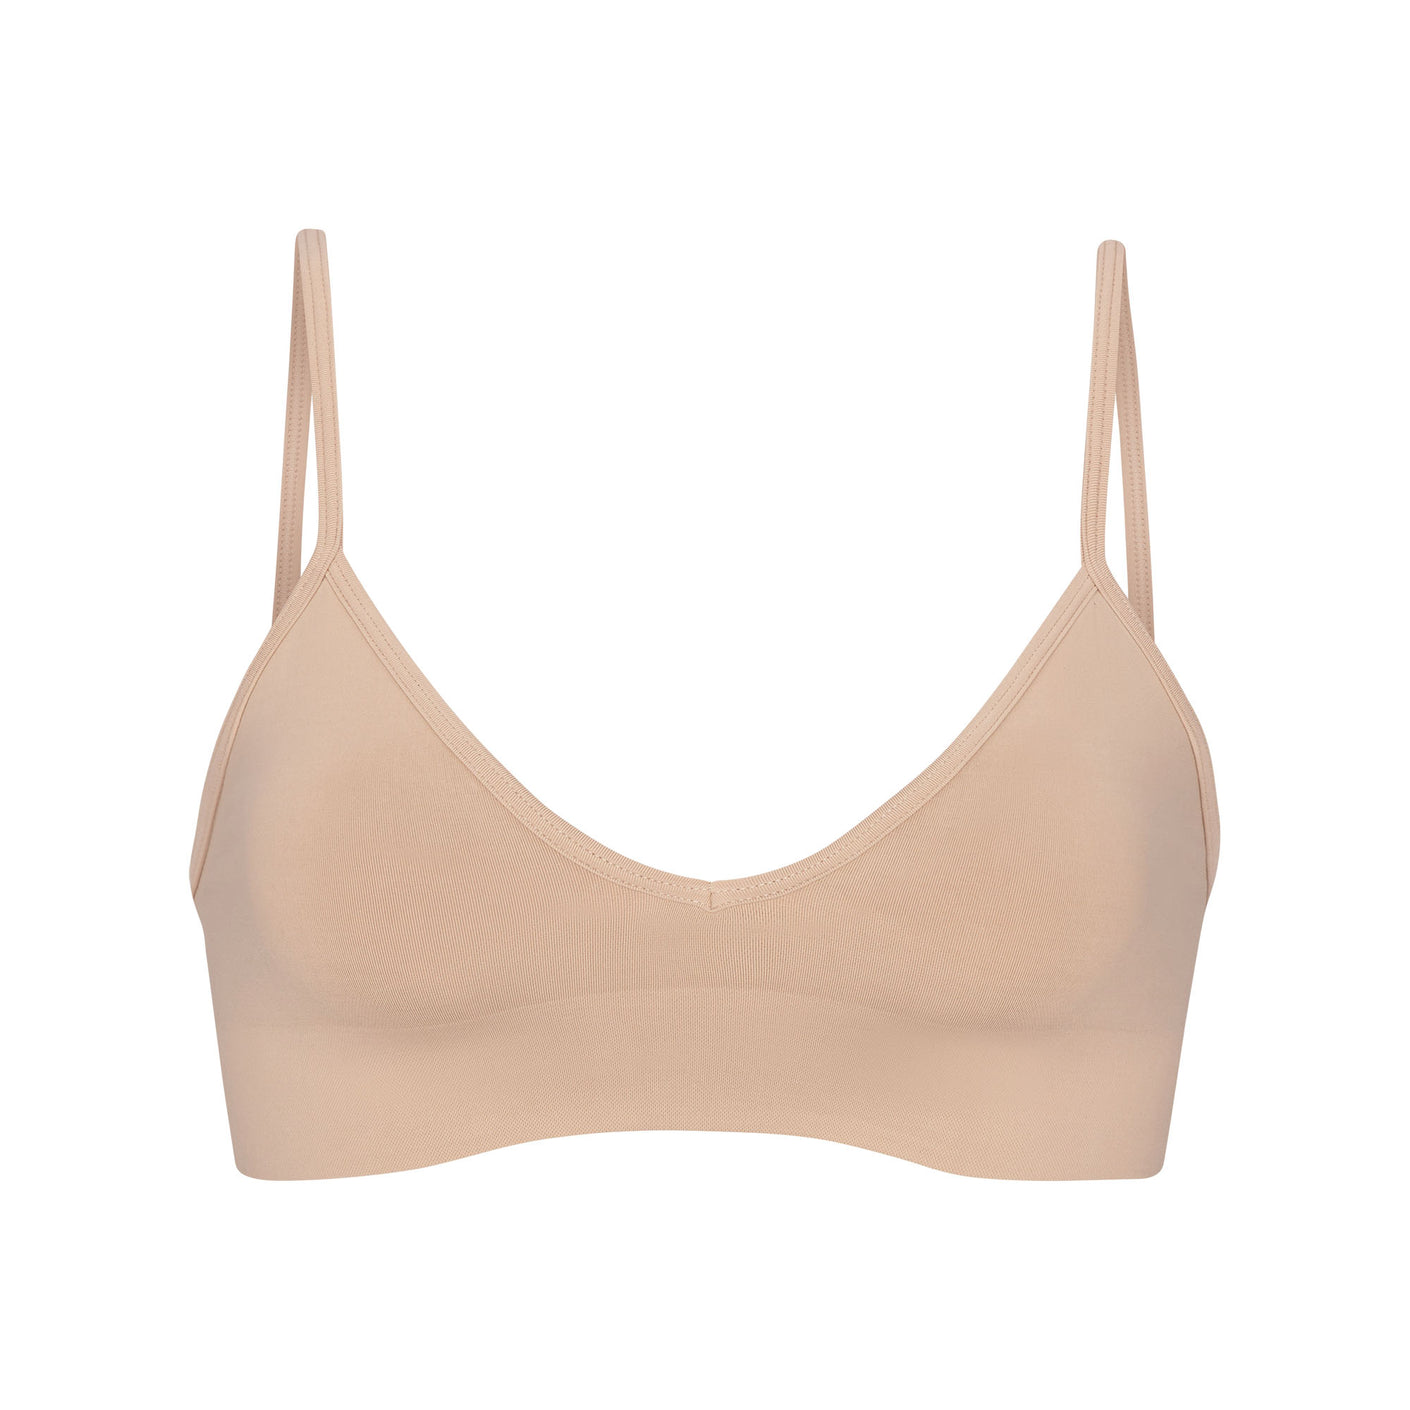 GRACING Non-Wired Push Up Bra- Silky Texture Fabric (size 36B)